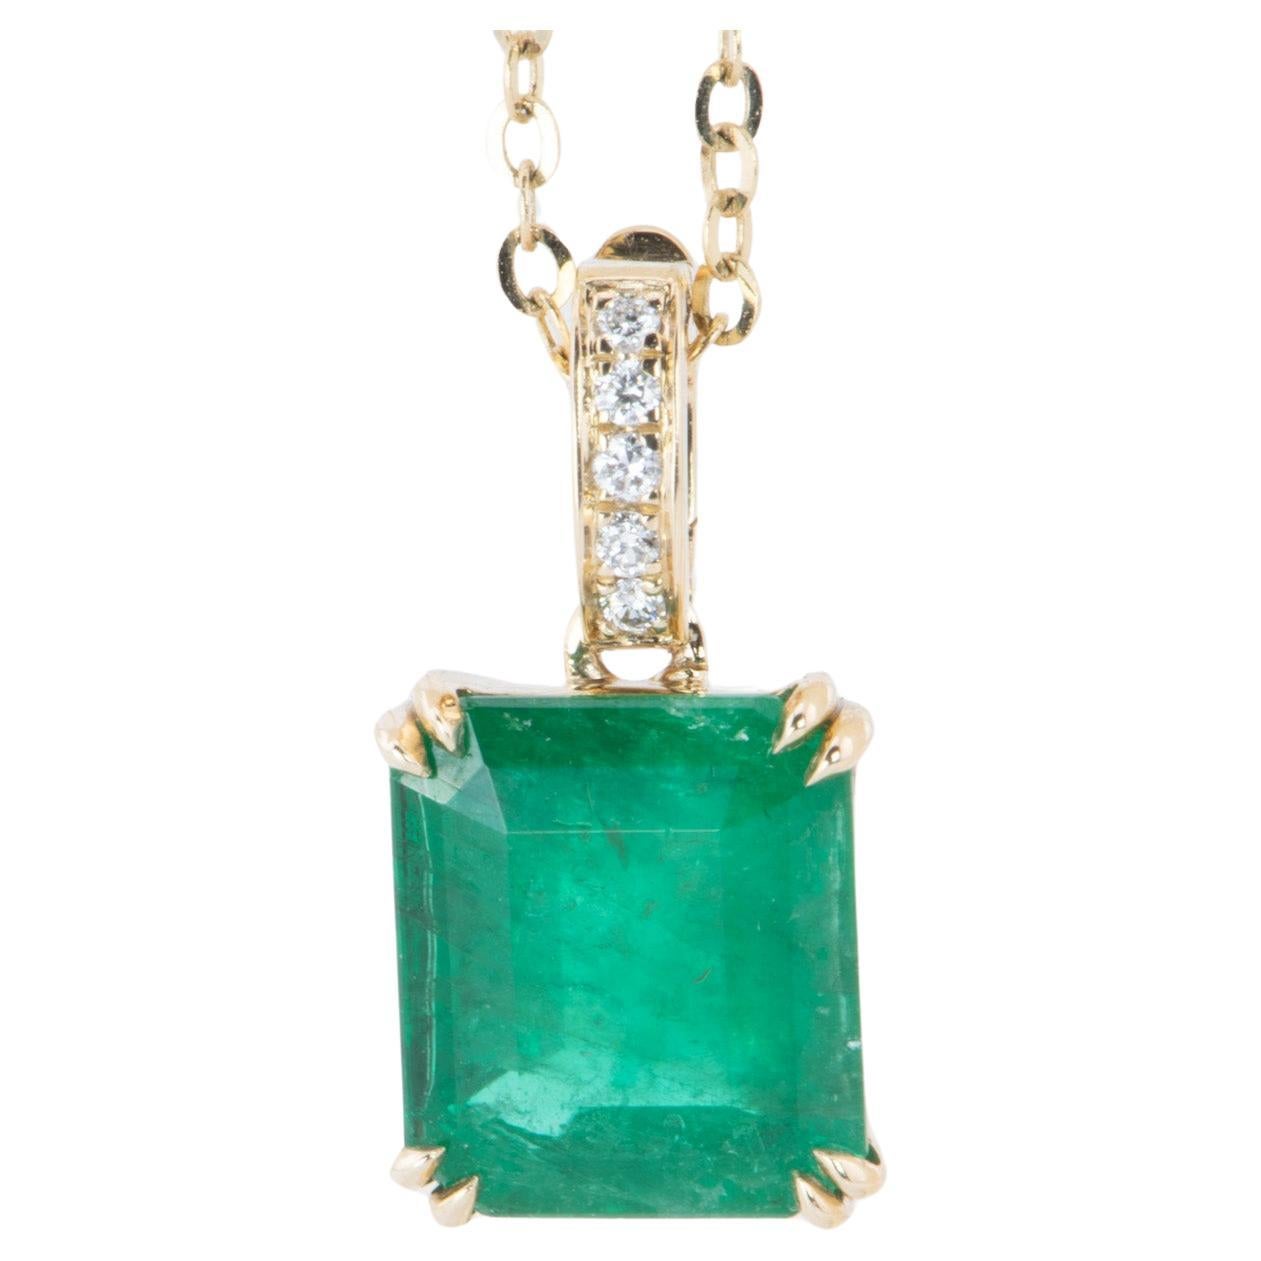 1.95ct Zambian Emerald Pendant with Clip-On Diamond Bail 14K Gold R4481 For Sale